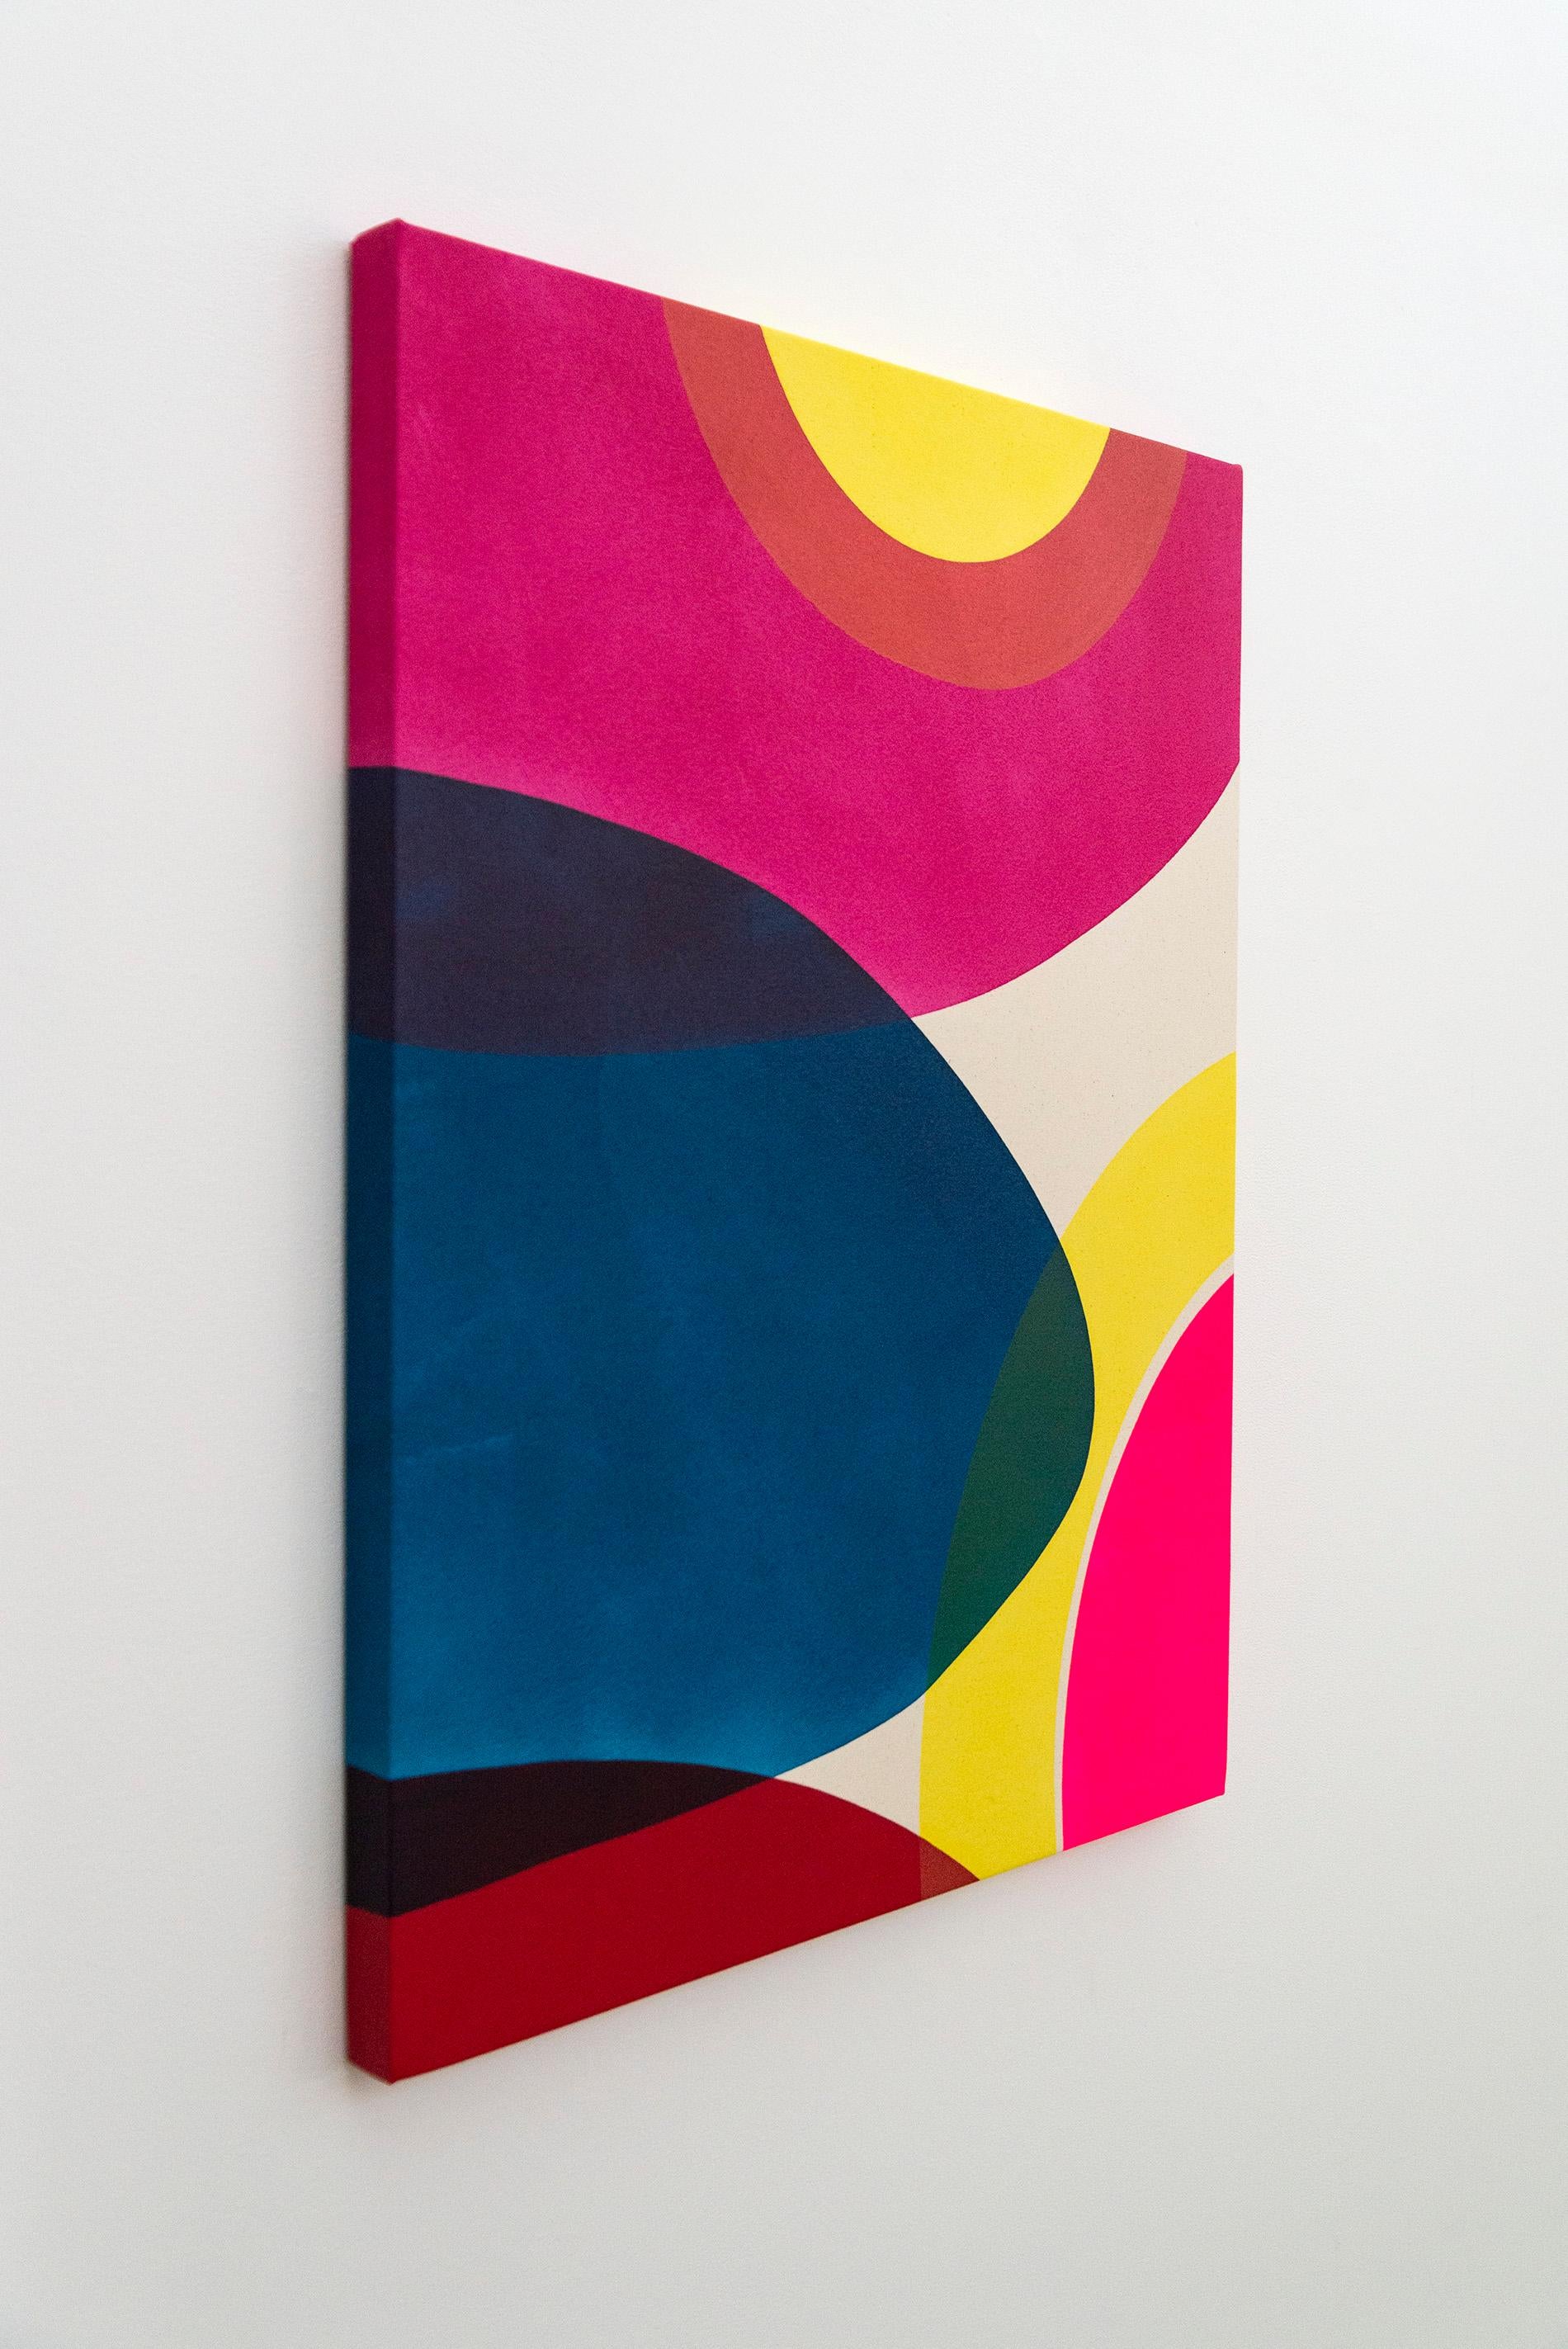 A brief time away No 1 - bright colours, abstract, minimalist, acrylic on canvas - Contemporary Painting by Aron Hill